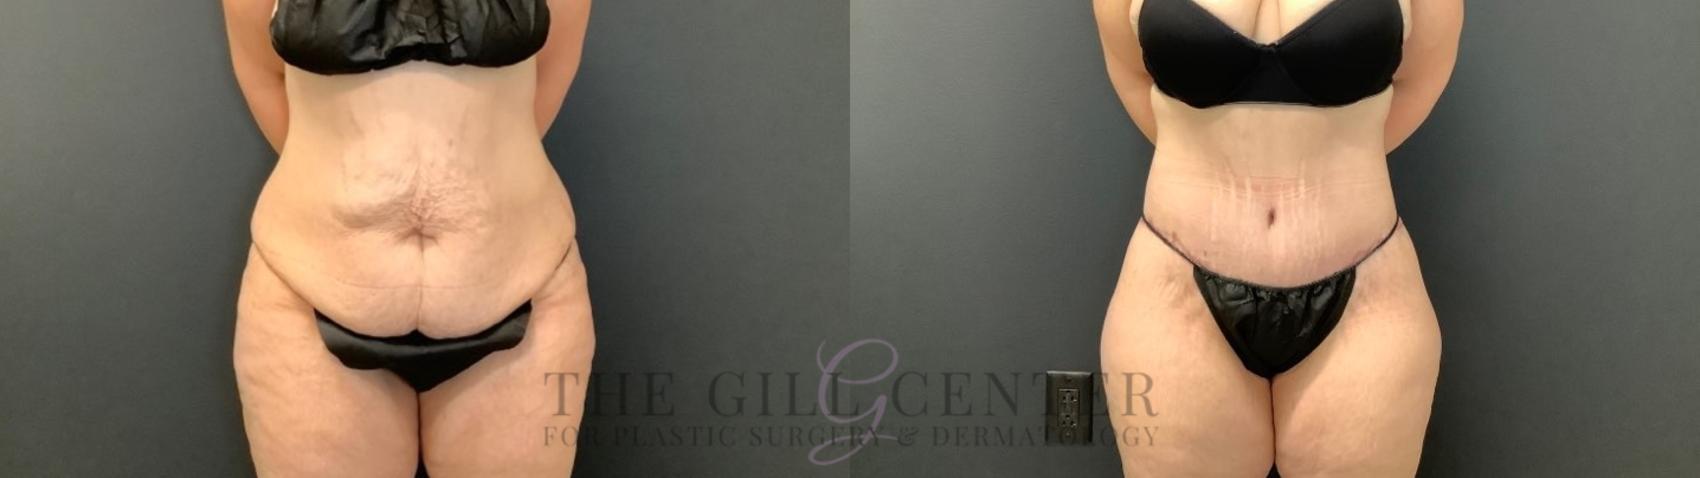 Body Lift Case 504 Before & After Front | The Woodlands, TX | The Gill Center for Plastic Surgery and Dermatology